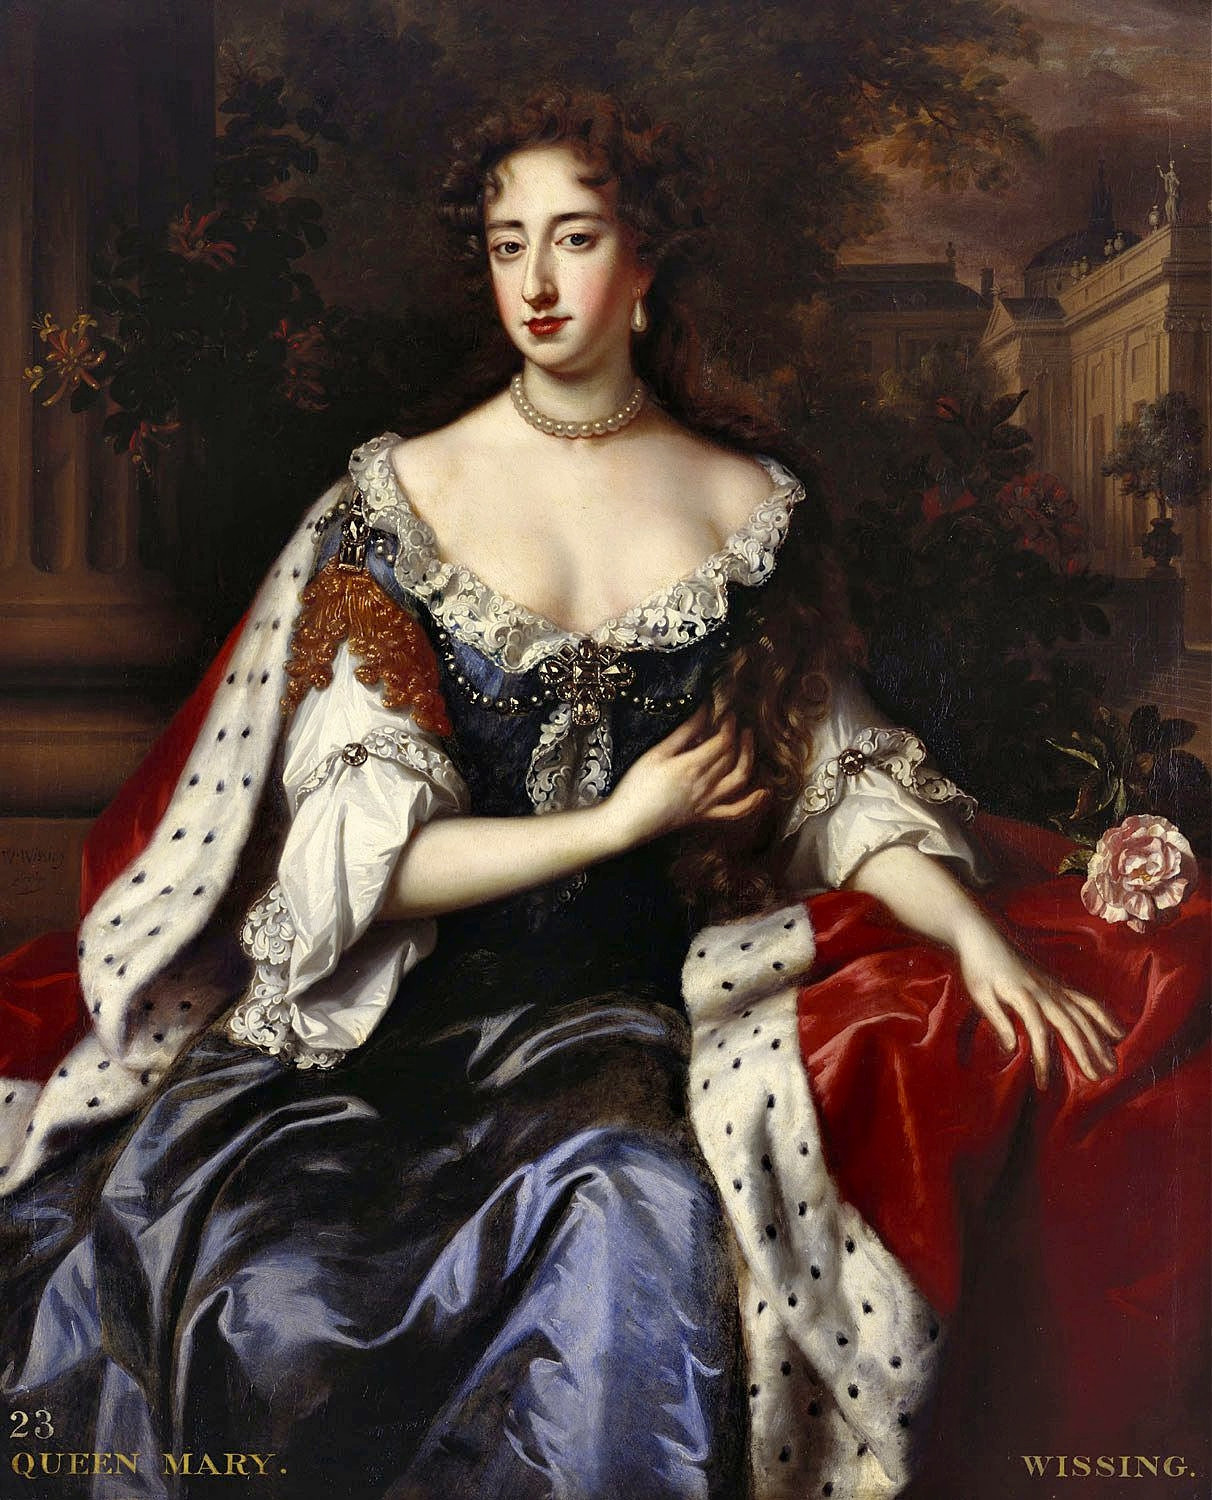 Queen Mary II by William Wissing